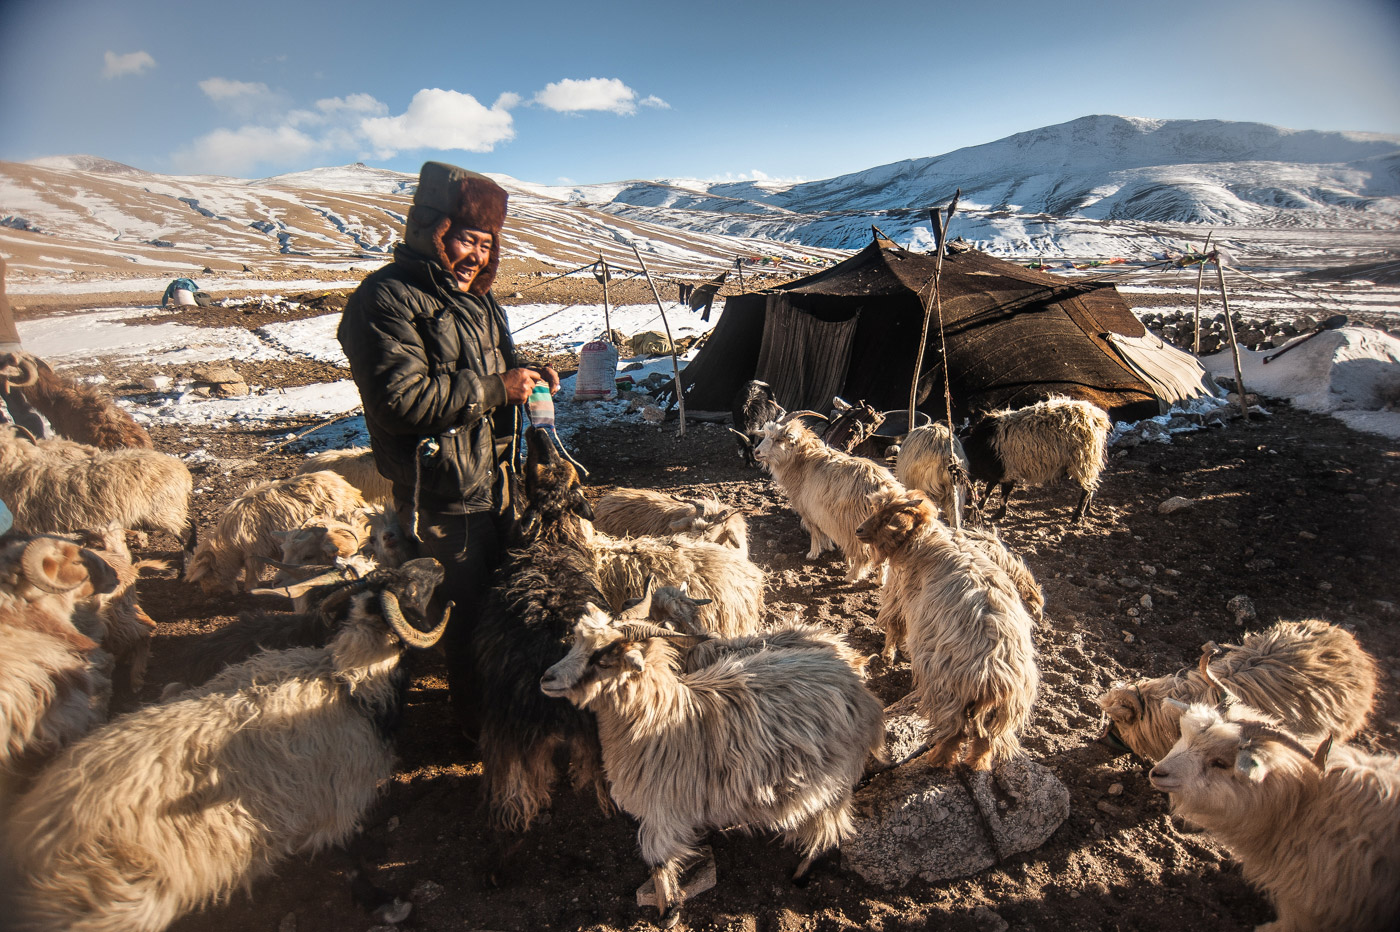 Karma Rinchen (a Changpa) is herding the pashmina goat. 'Changpa' is a tribe found in the high altitudes of Ladakh